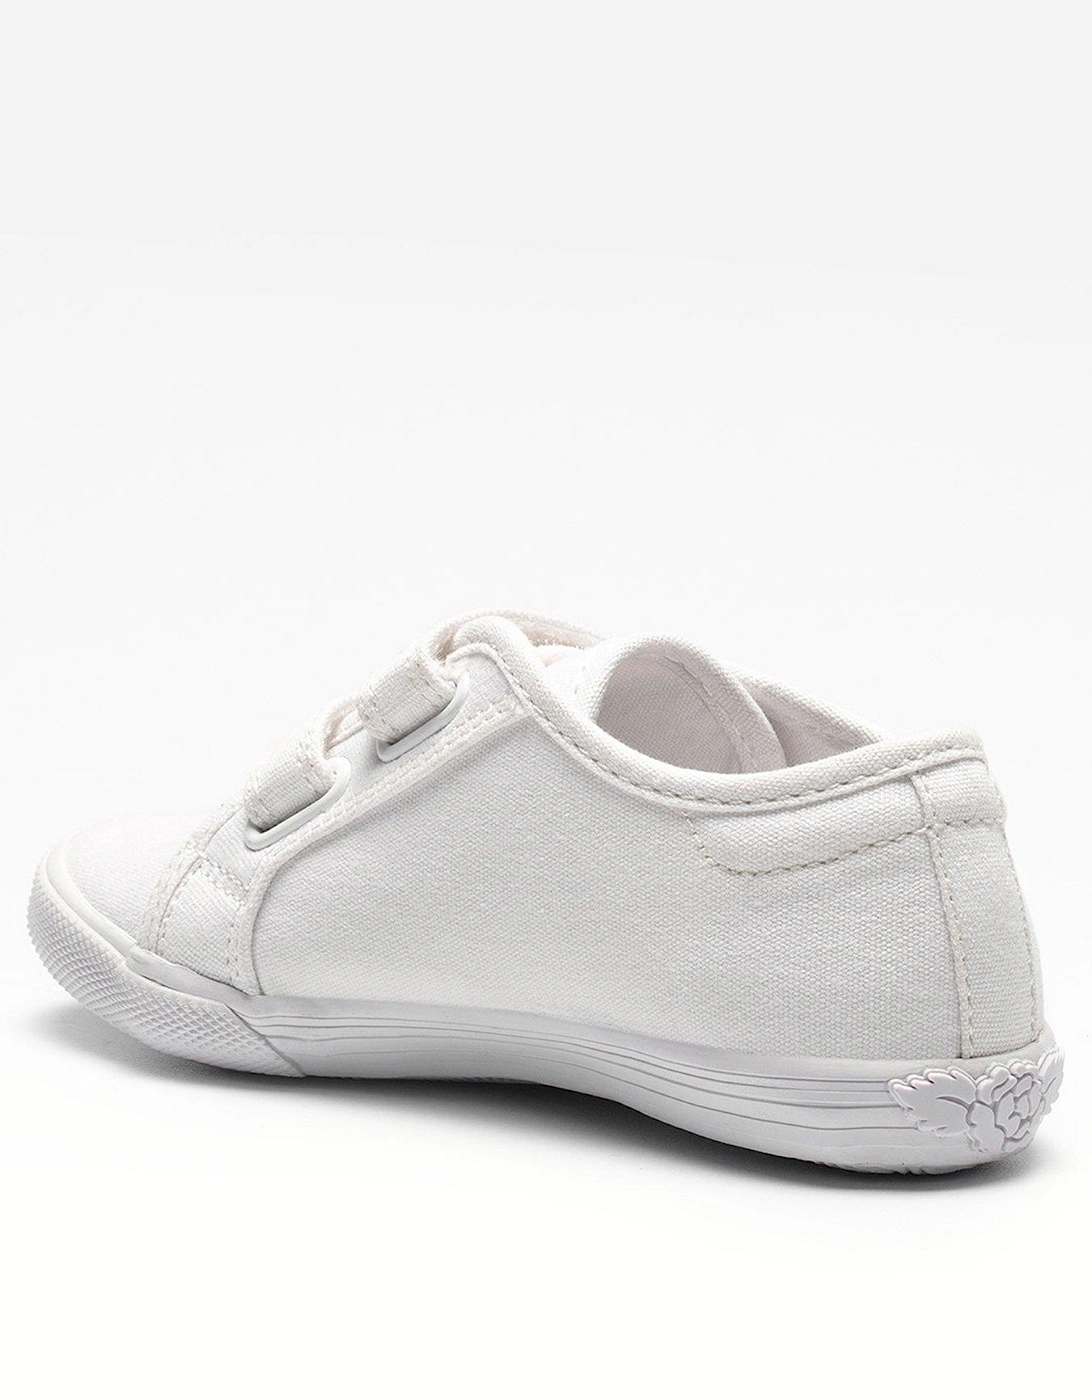 Girls Lily Trainers